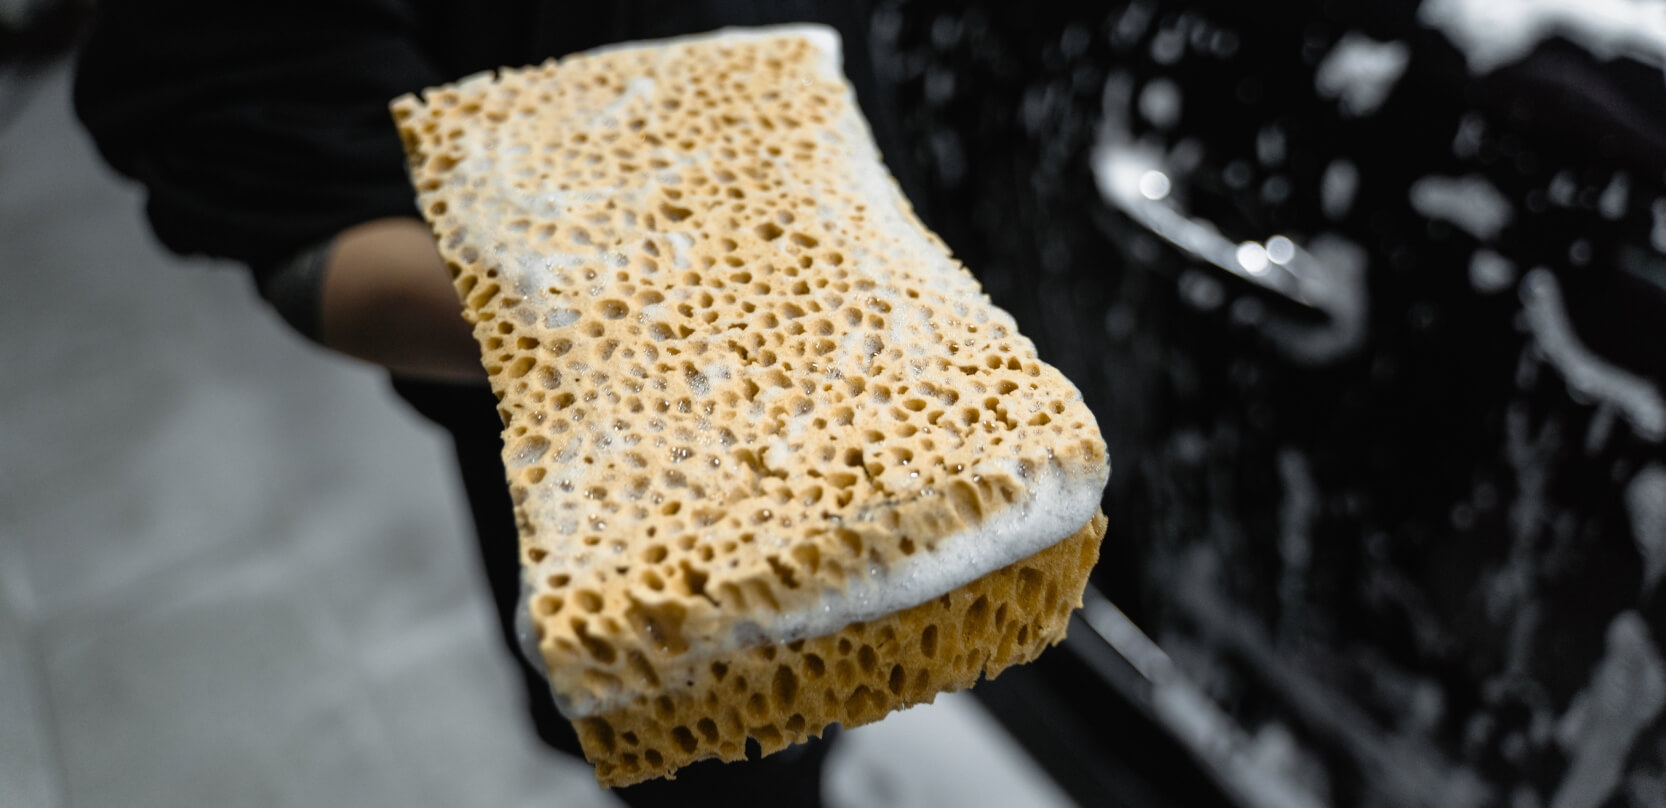 Stockphoto of a sponge that is used for car cleaning